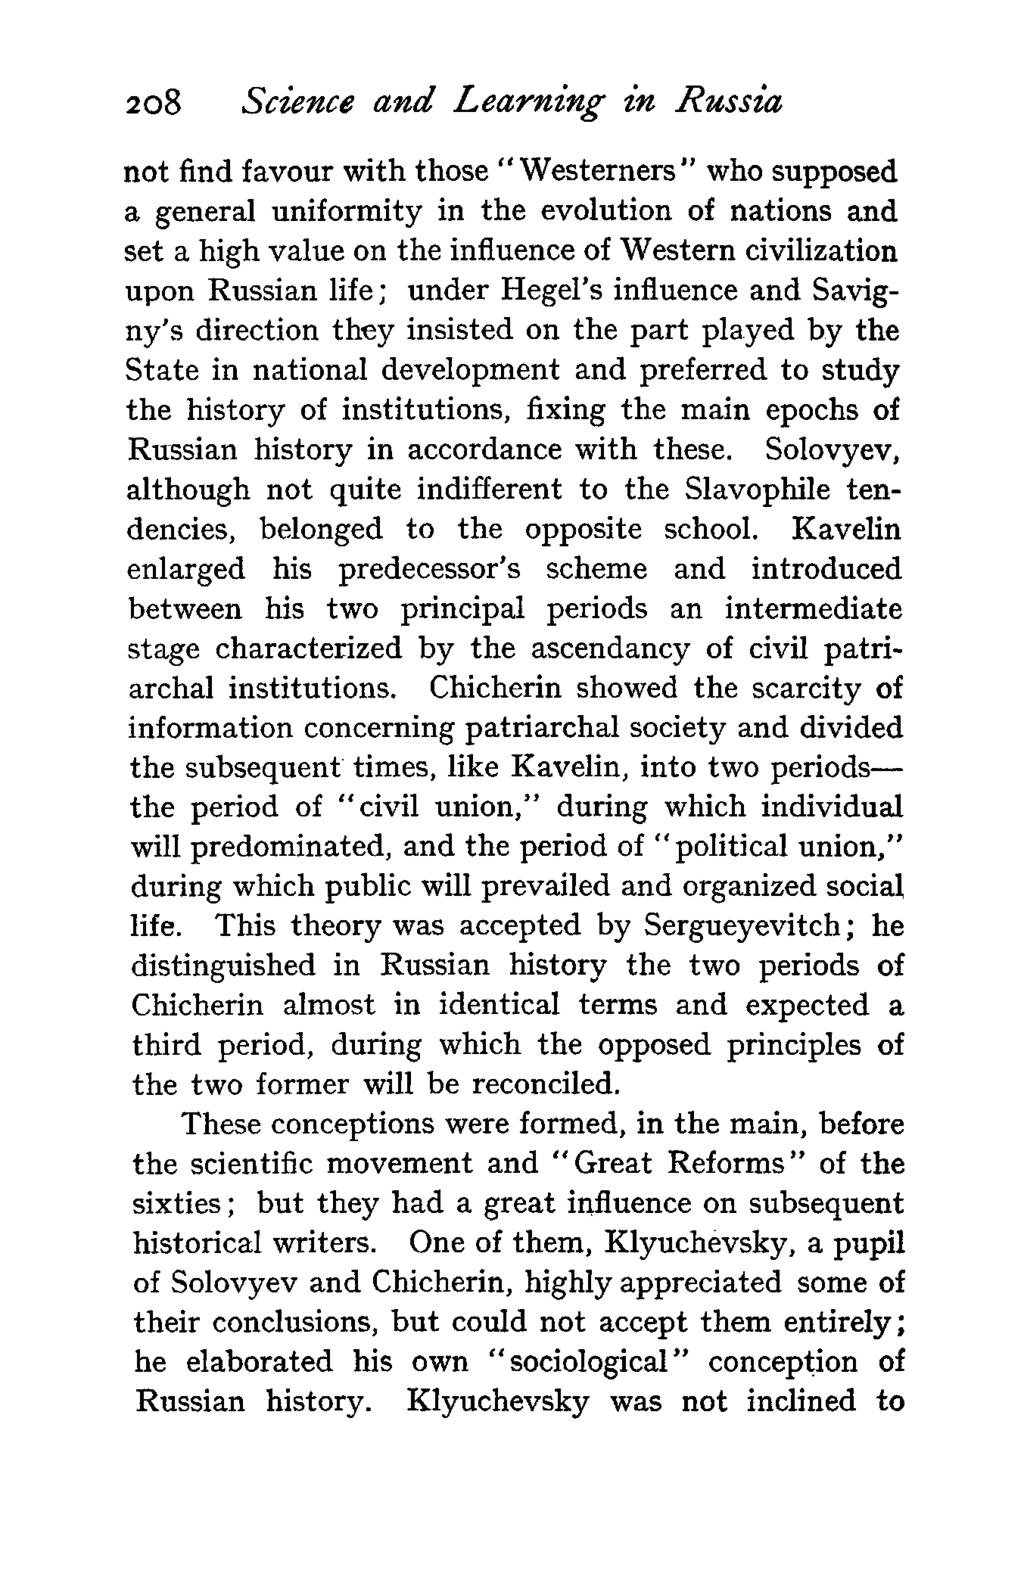 2o8 Science and Learning in Russia not find favour with those "Westerners" who supposed a general uniformity in the evolution of nations and set a high value on the influence of Western civilization